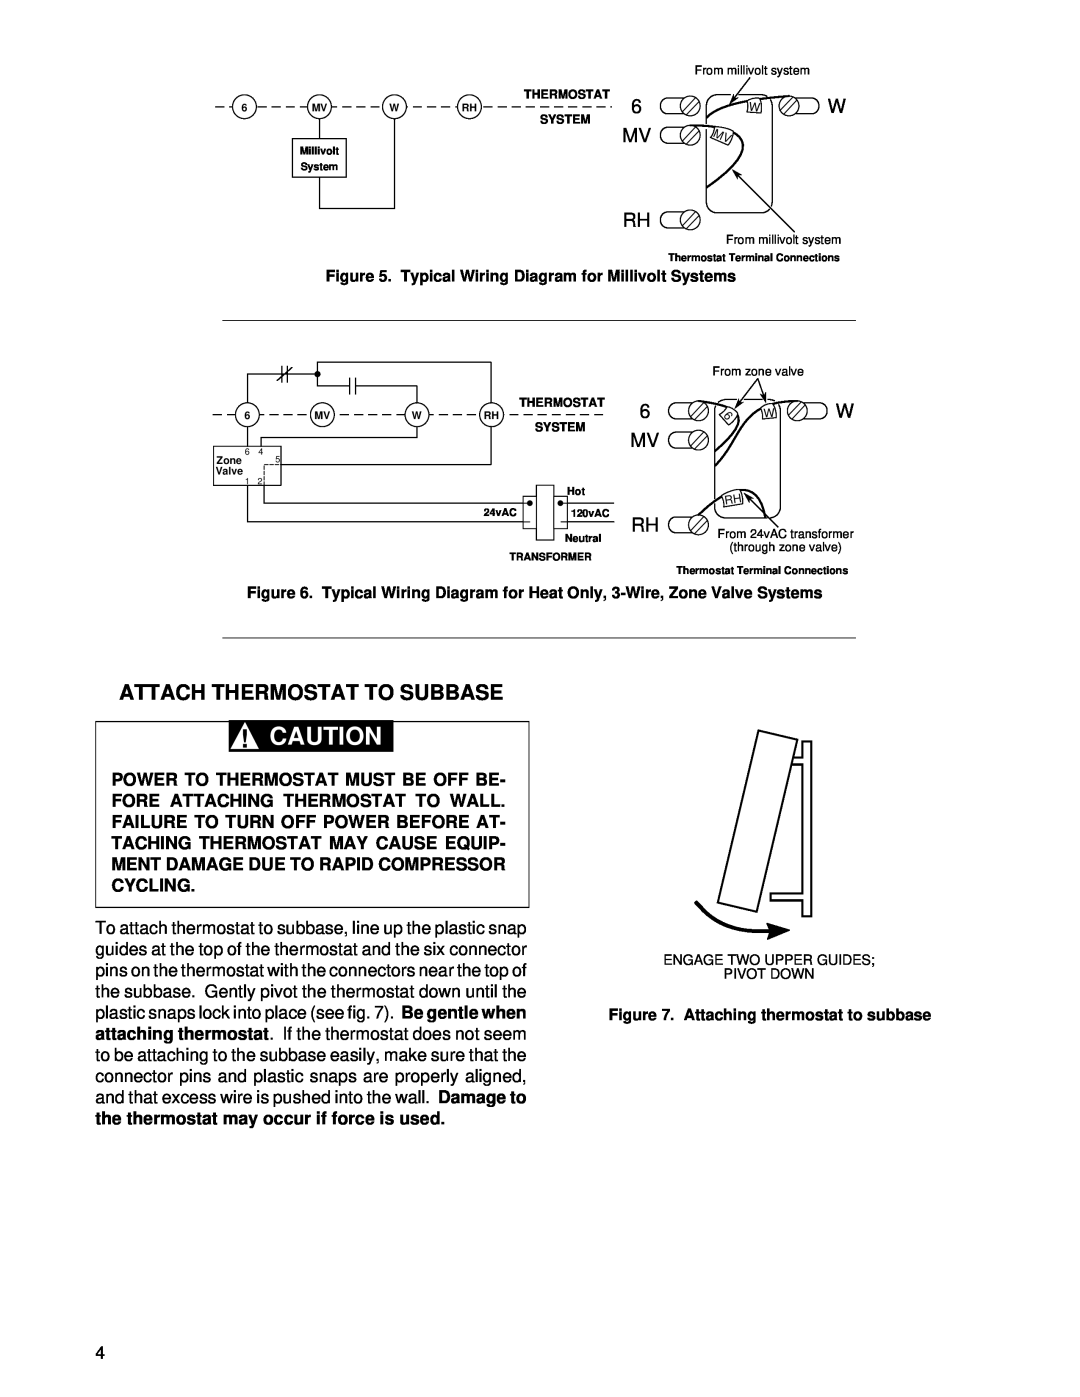 White Rodgers 1F90-60 Attach Thermostat To Subbase, Mv Rh, Typical Wiring Diagram for Millivolt Systems 